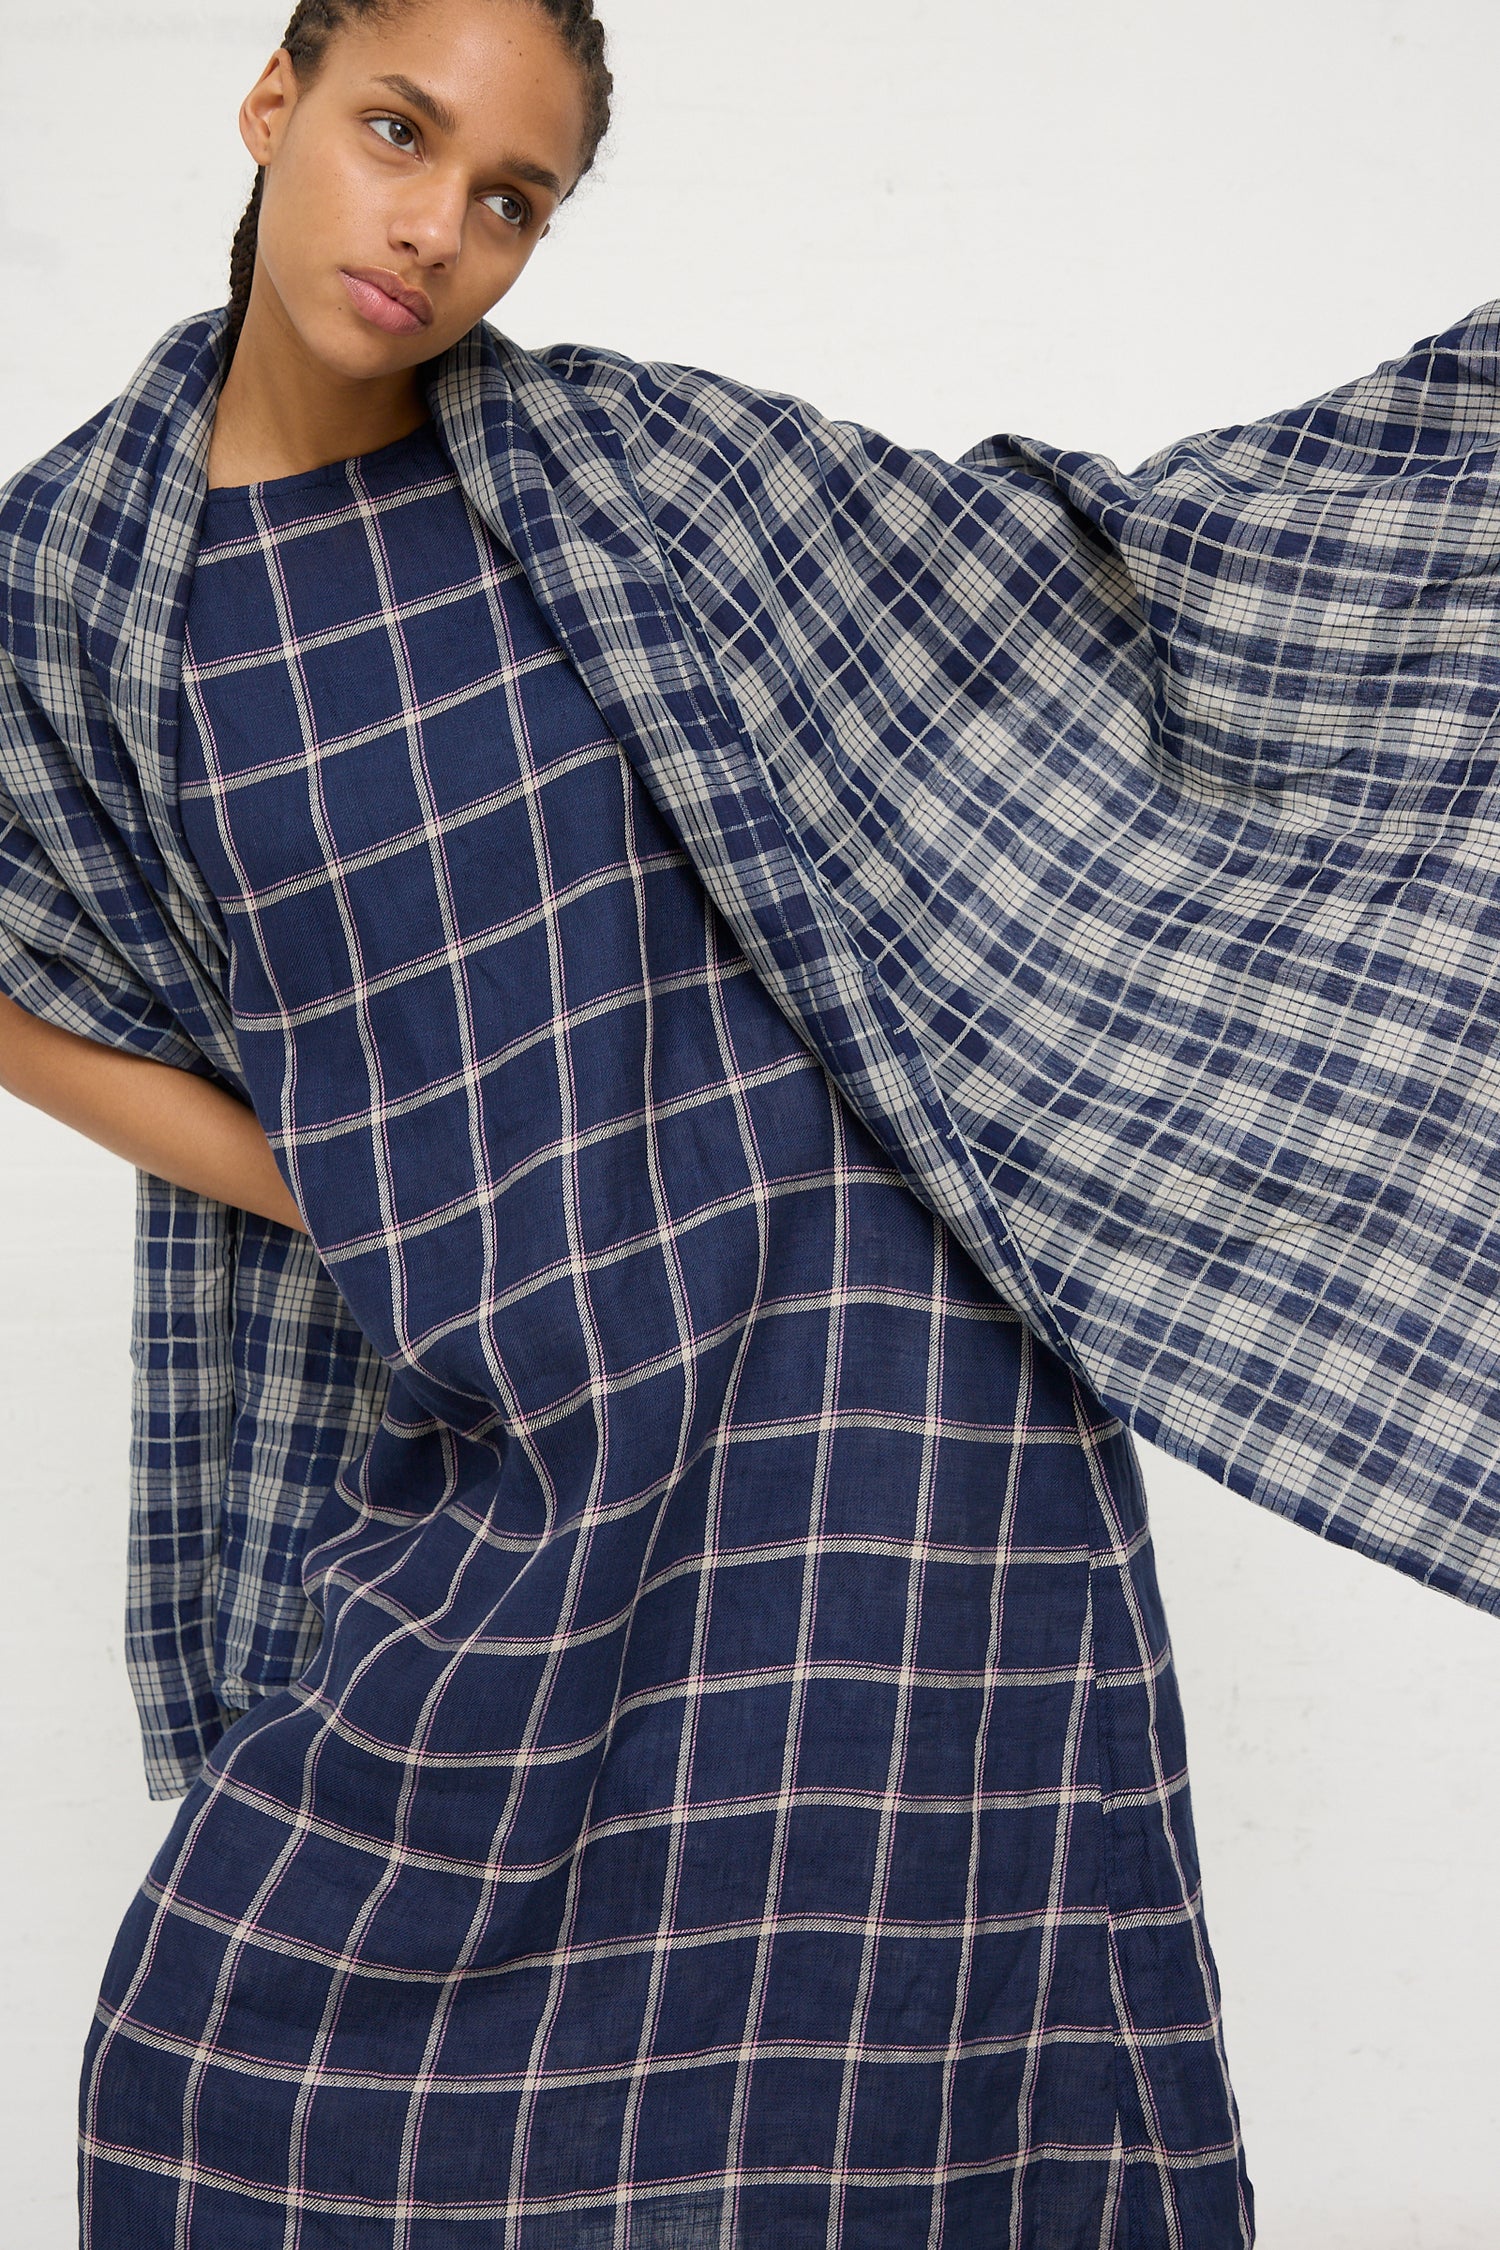 A woman posing in a blue plaid Ichi Antiquités dress with a flowing sleeve design, complemented by an Ichi Antiquités Linen Check Stole in Dark Indigo and Natural.